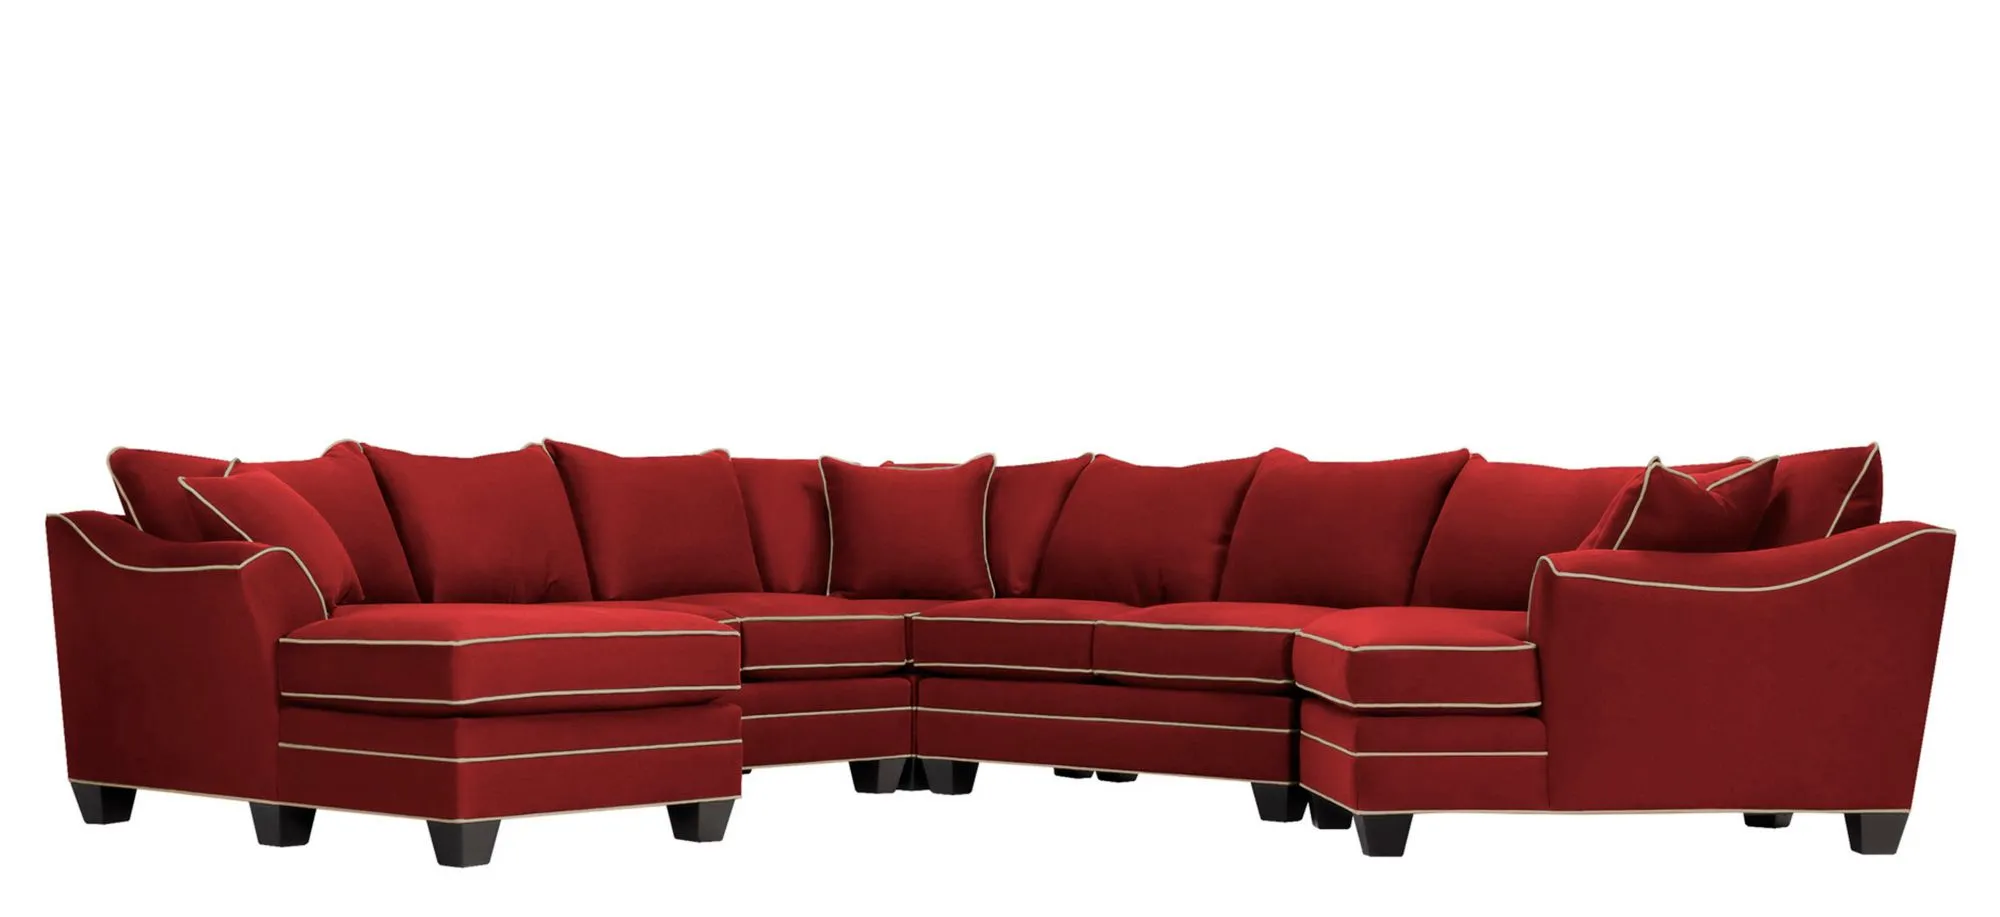 Foresthill 5-pc. Left Hand Facing Sectional Sofa in Suede So Soft Cardinal/Mineral by H.M. Richards